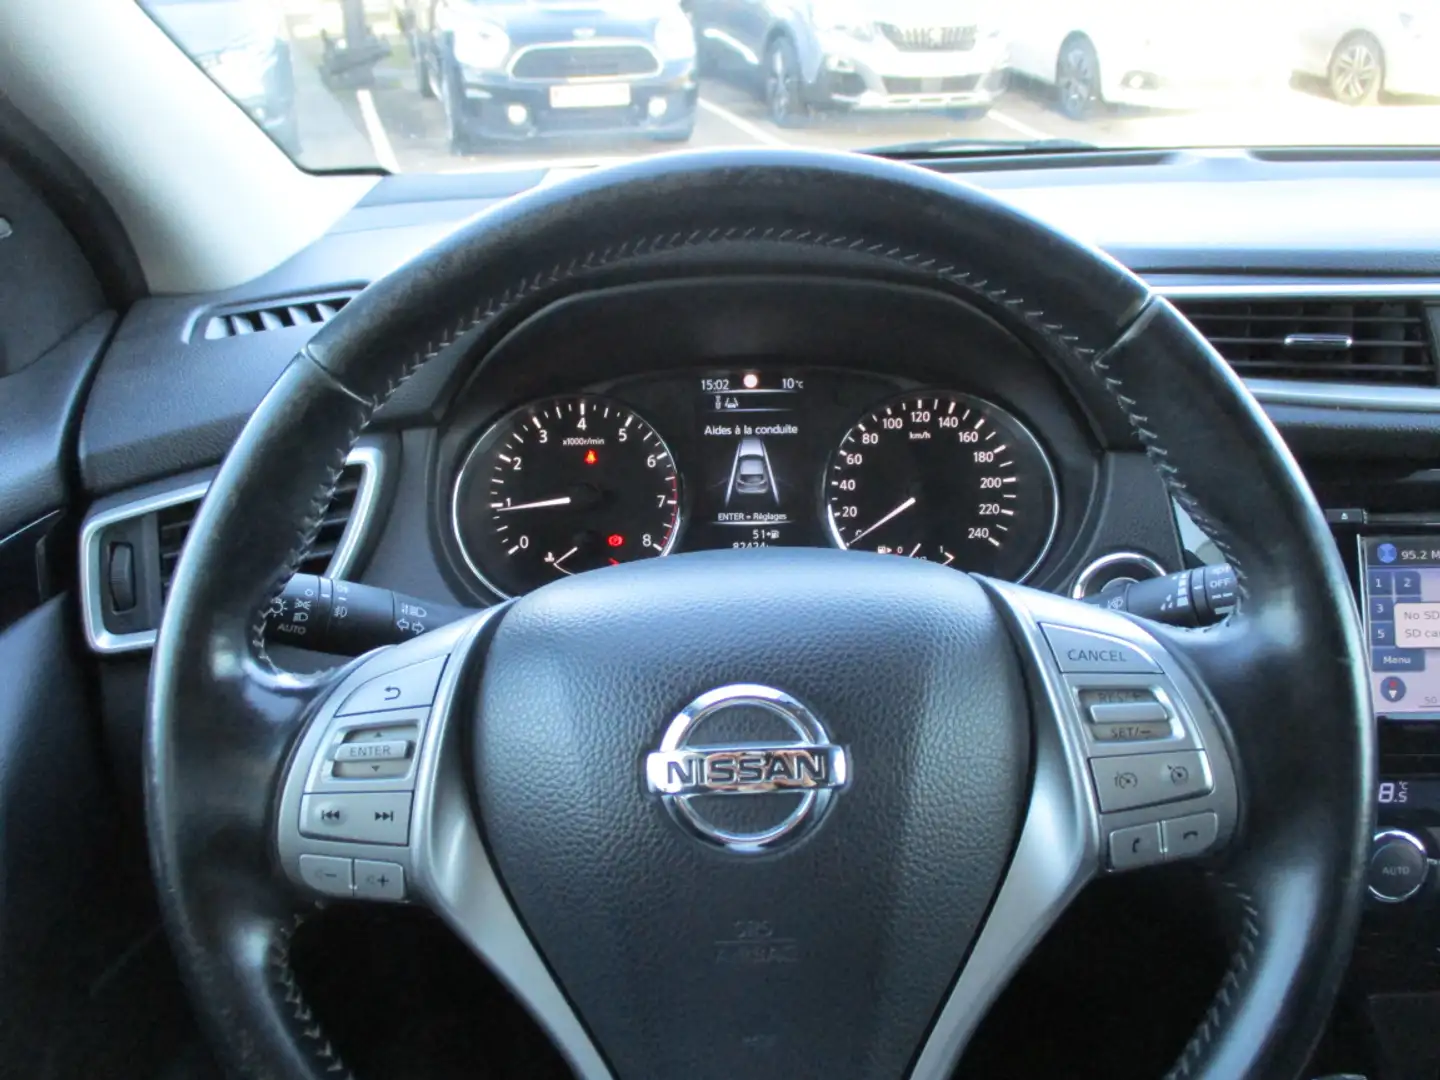 Nissan Qashqai 1.2 DIG-T 115 Stop/Start Connect Edition - 2